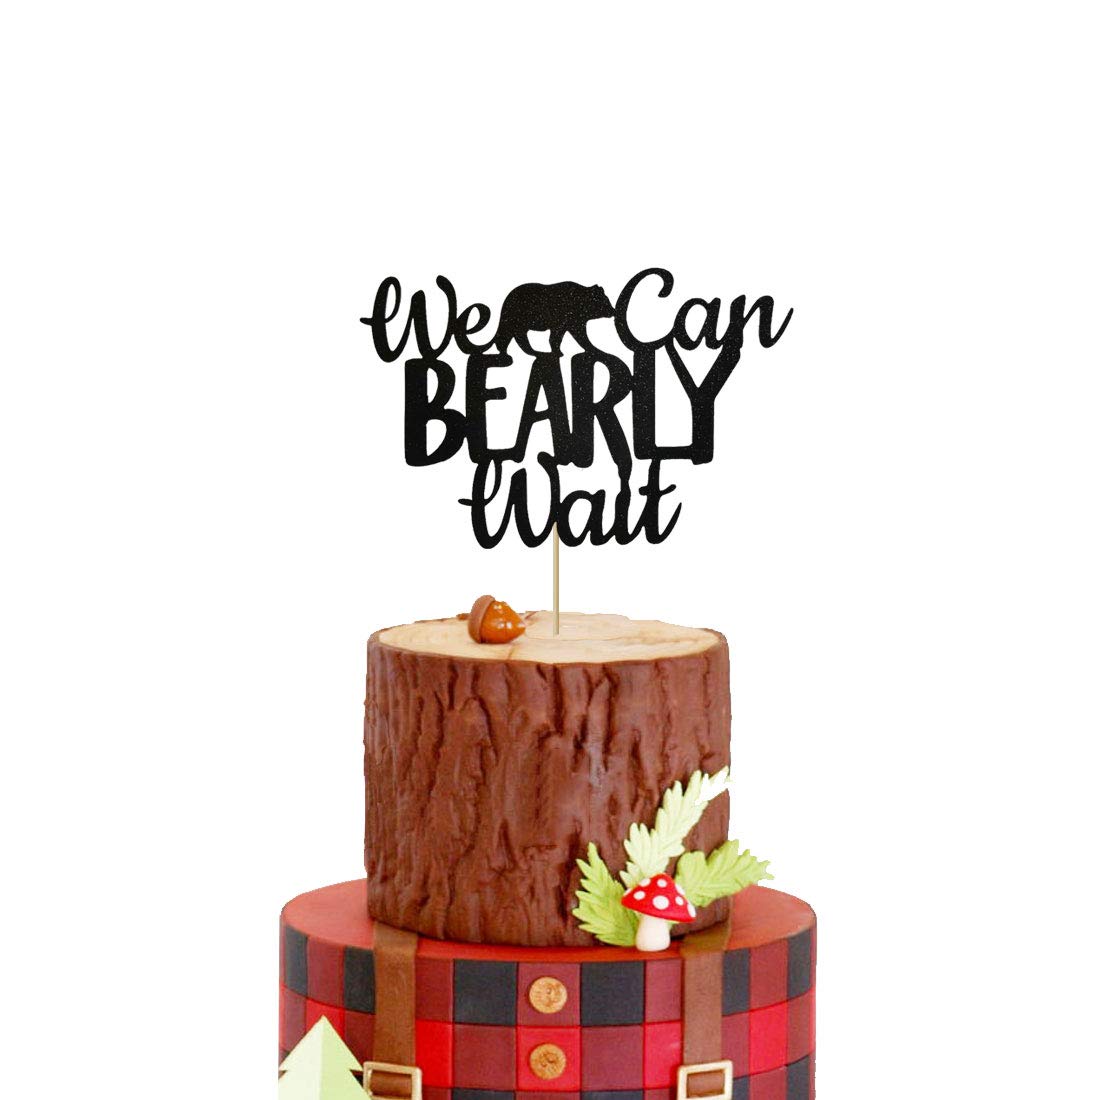 Baby Bear Theme Baby Shower Gender Reveal Party Decoration Supplies Gold Glitter. We Can Bearly Wait Baby Shower Cake Topper 